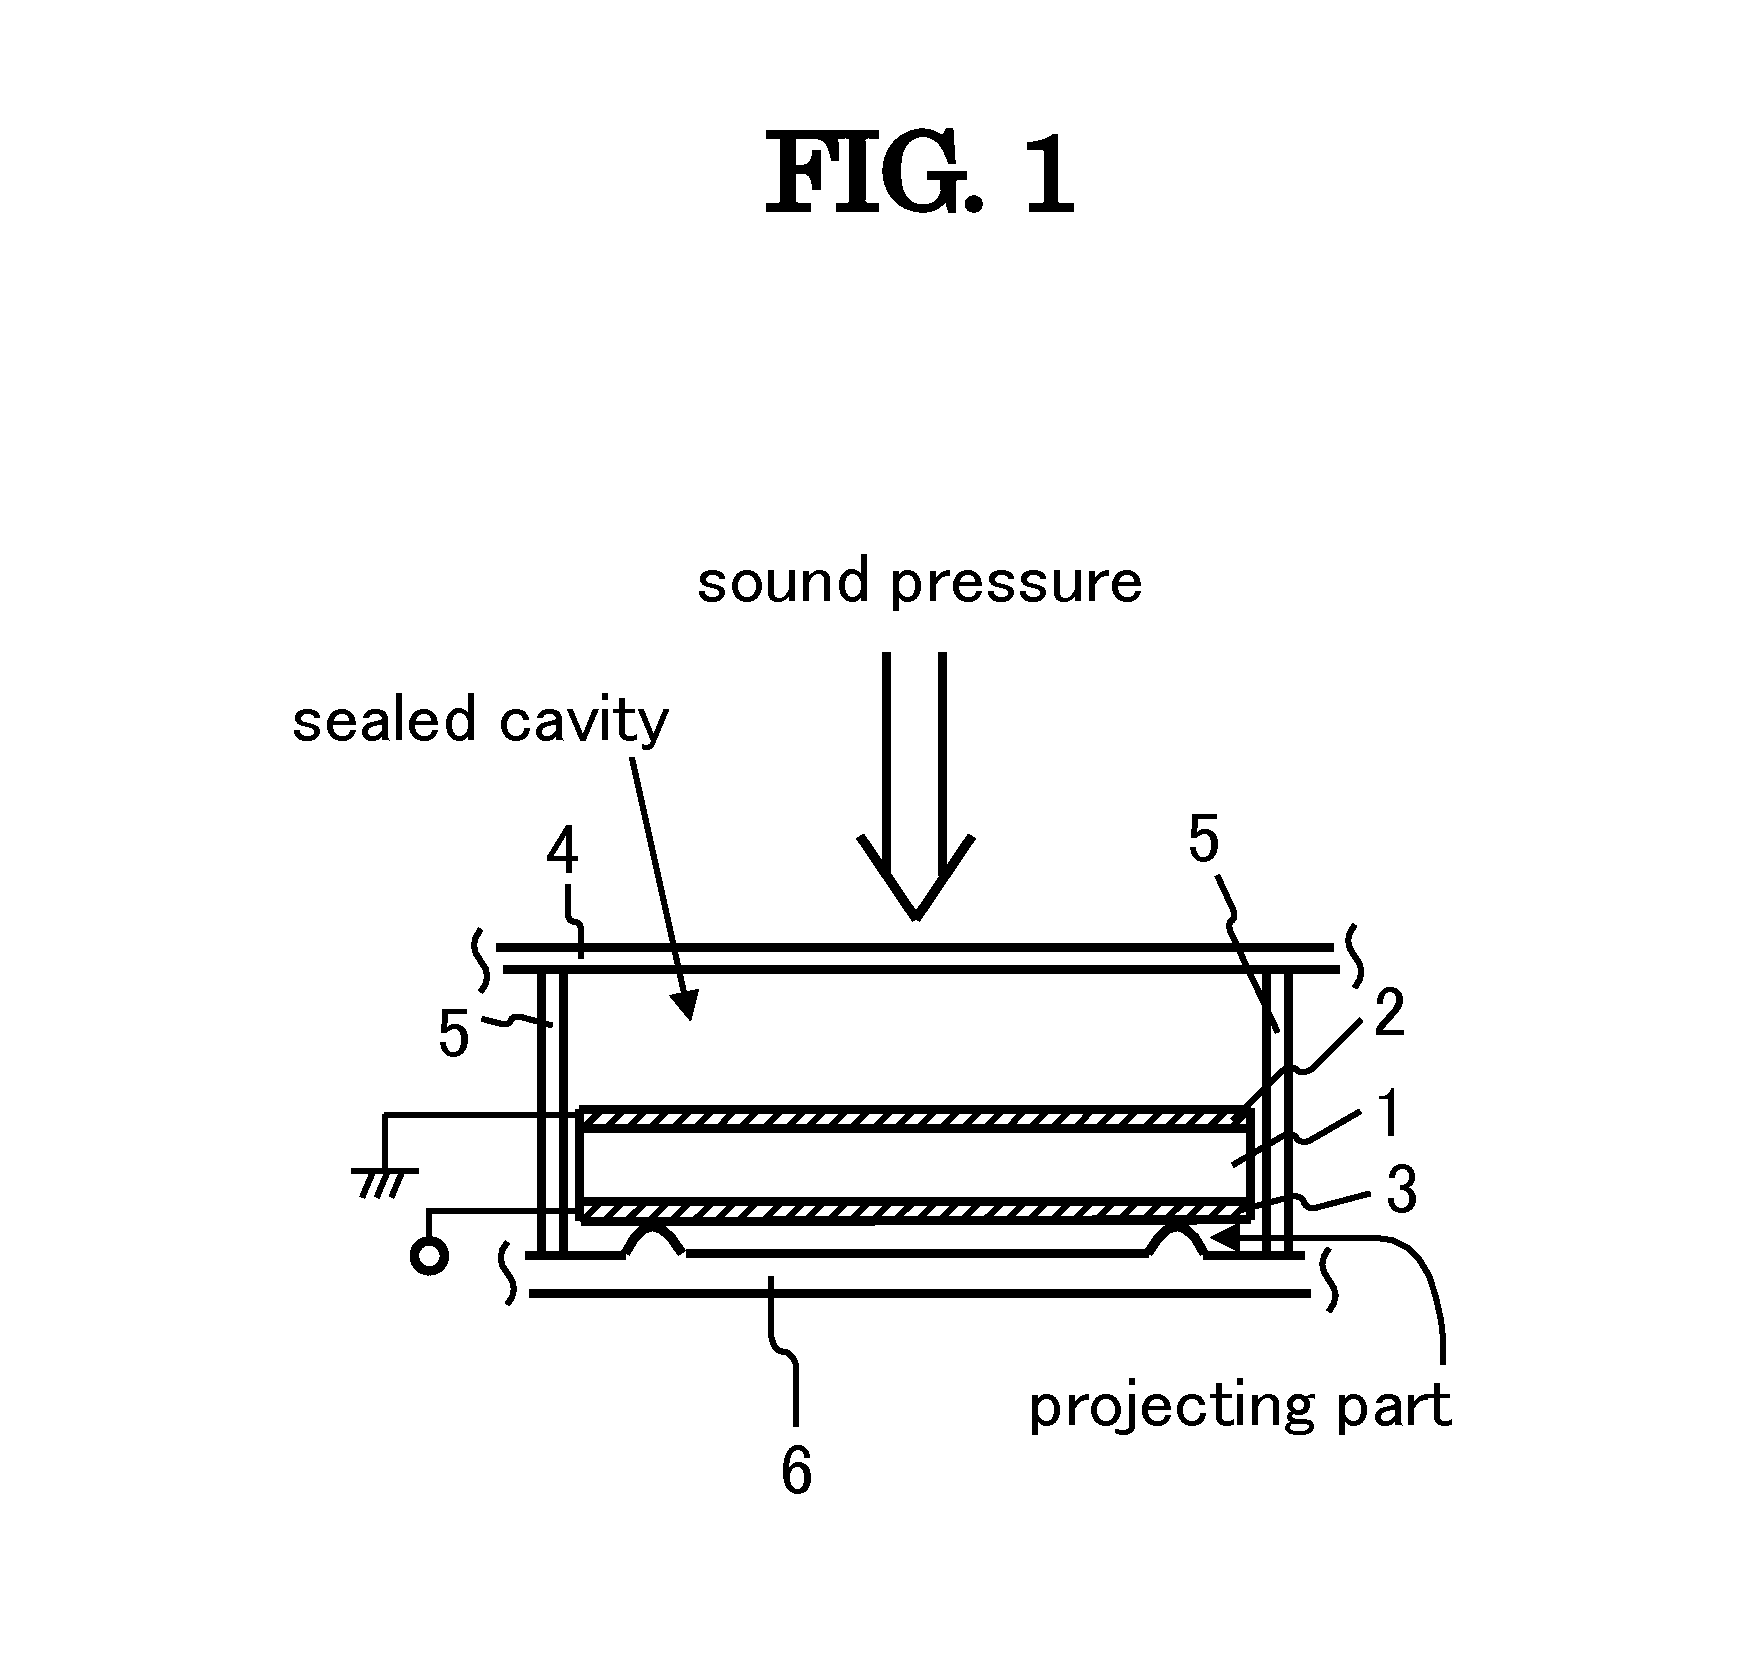 Apparatus for generating electricity